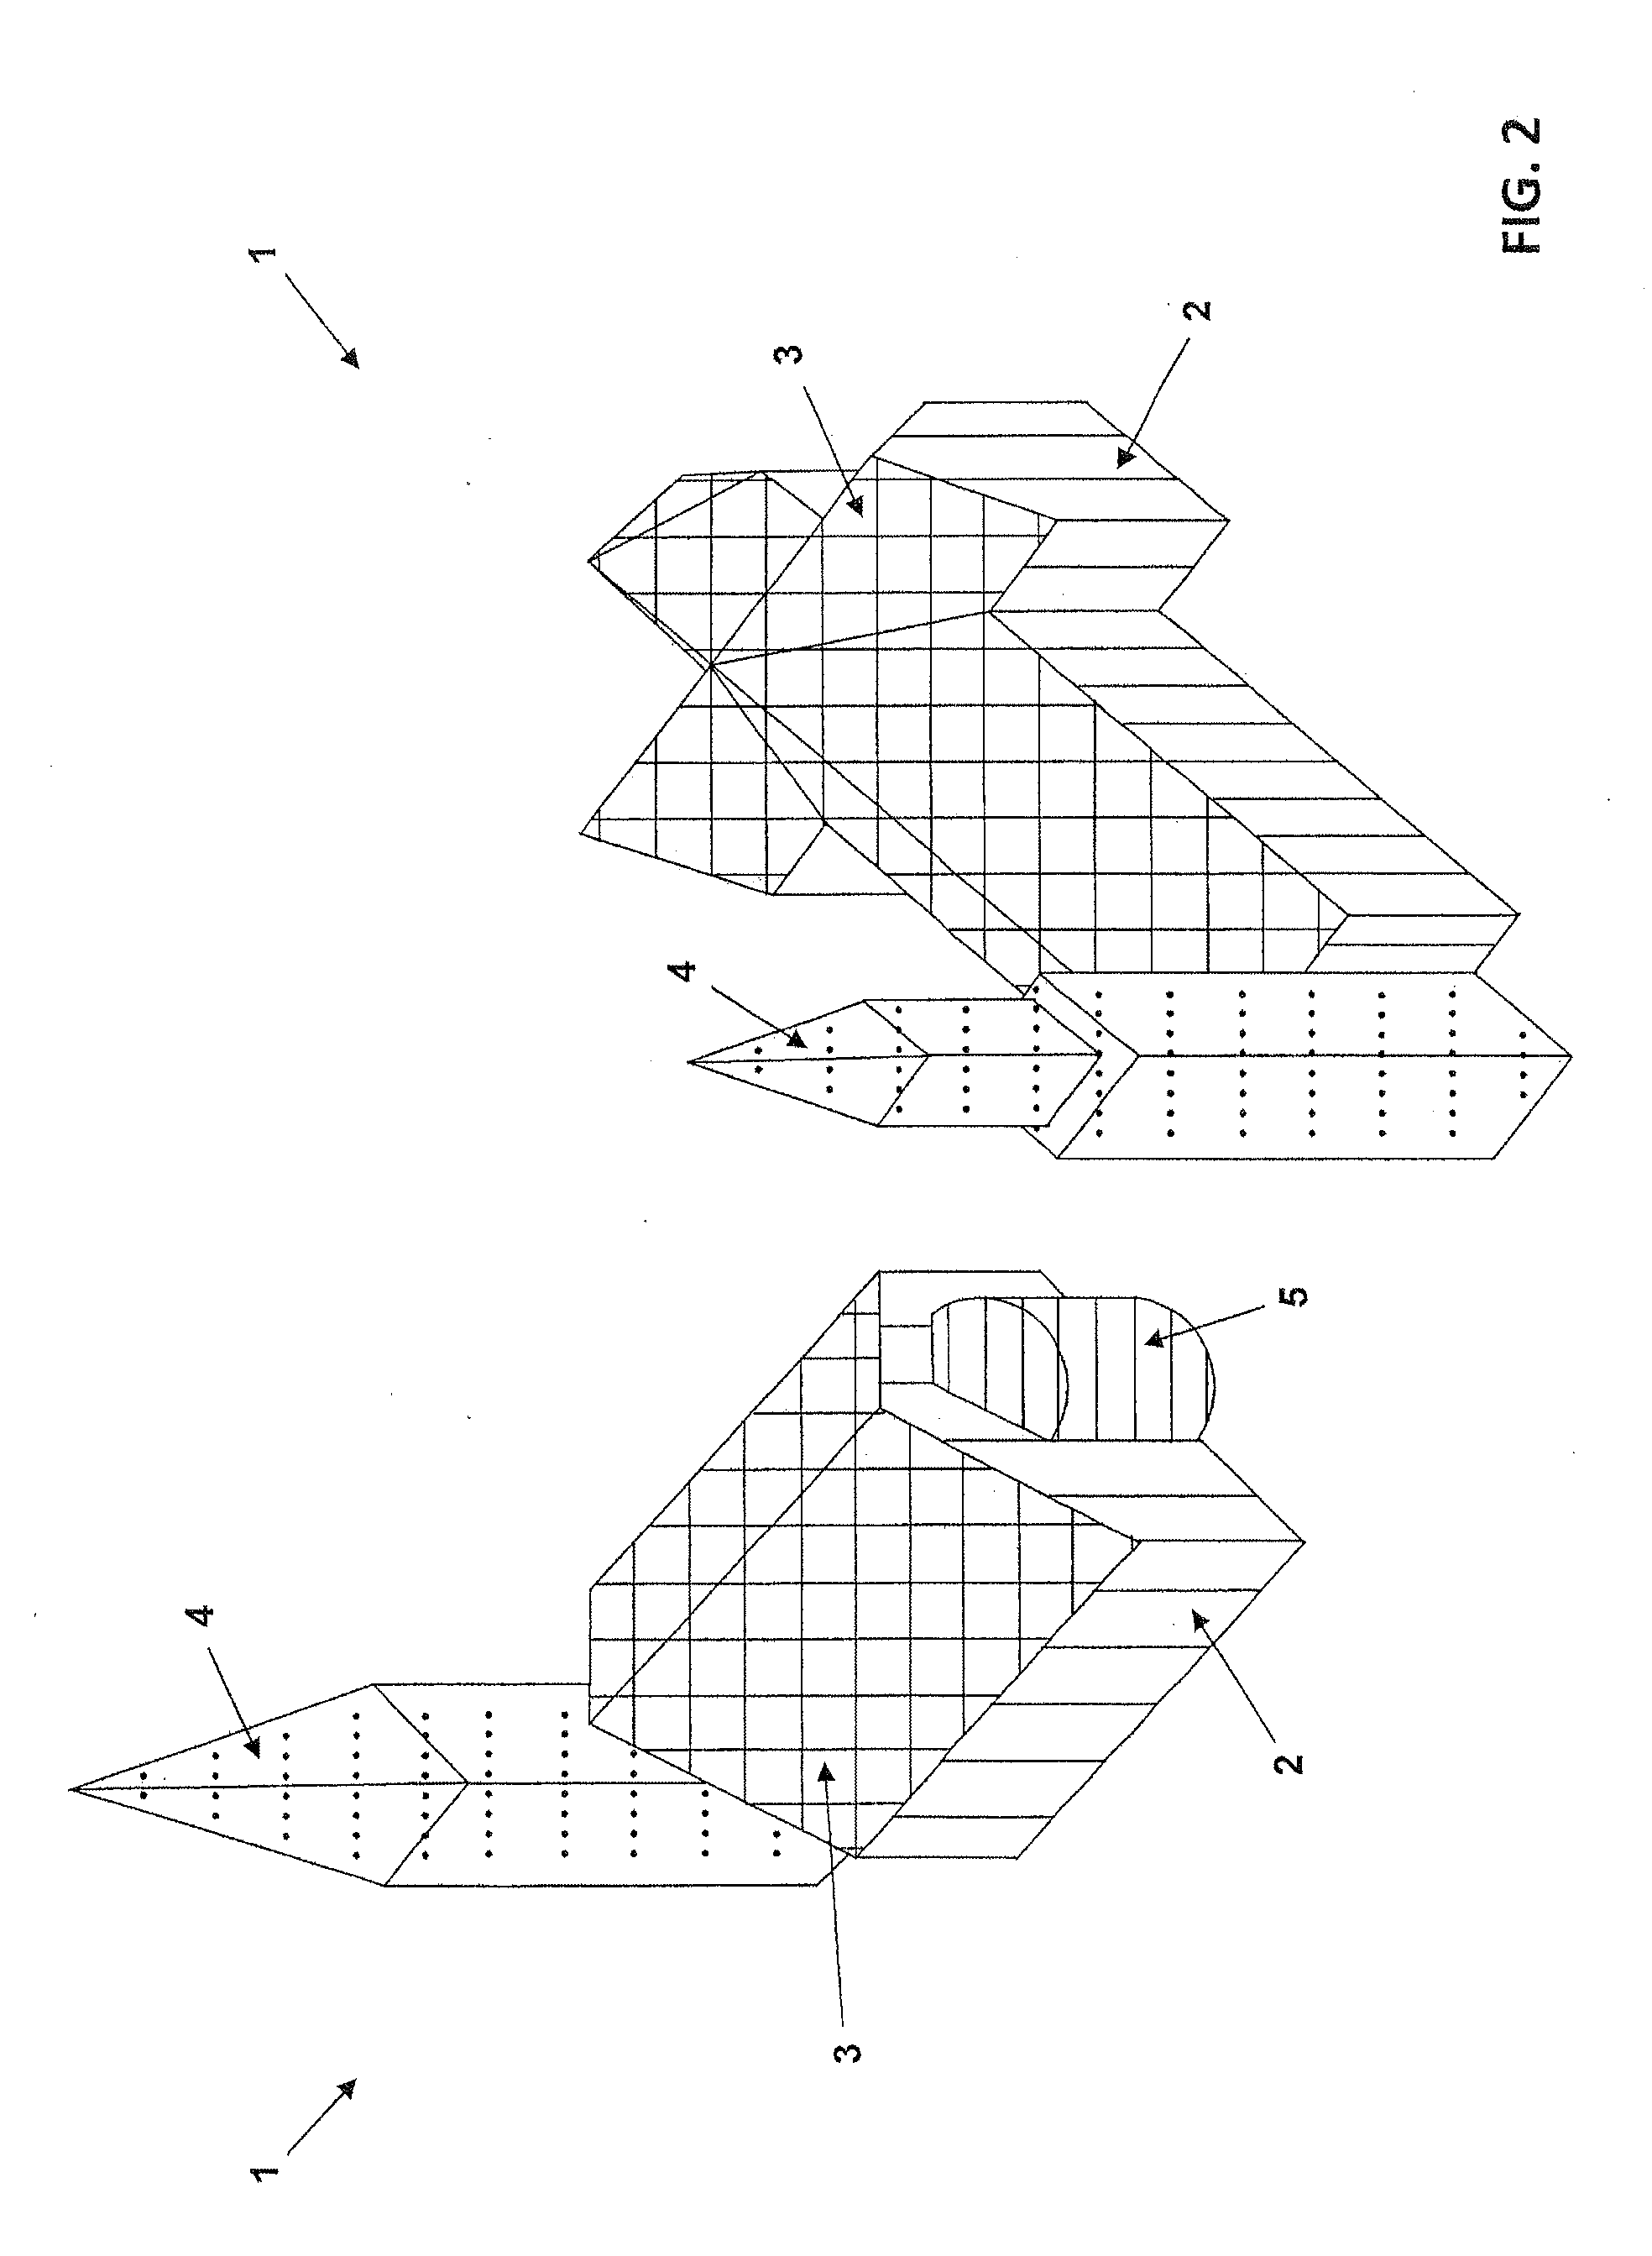 Parameterized graphical representation of buildings